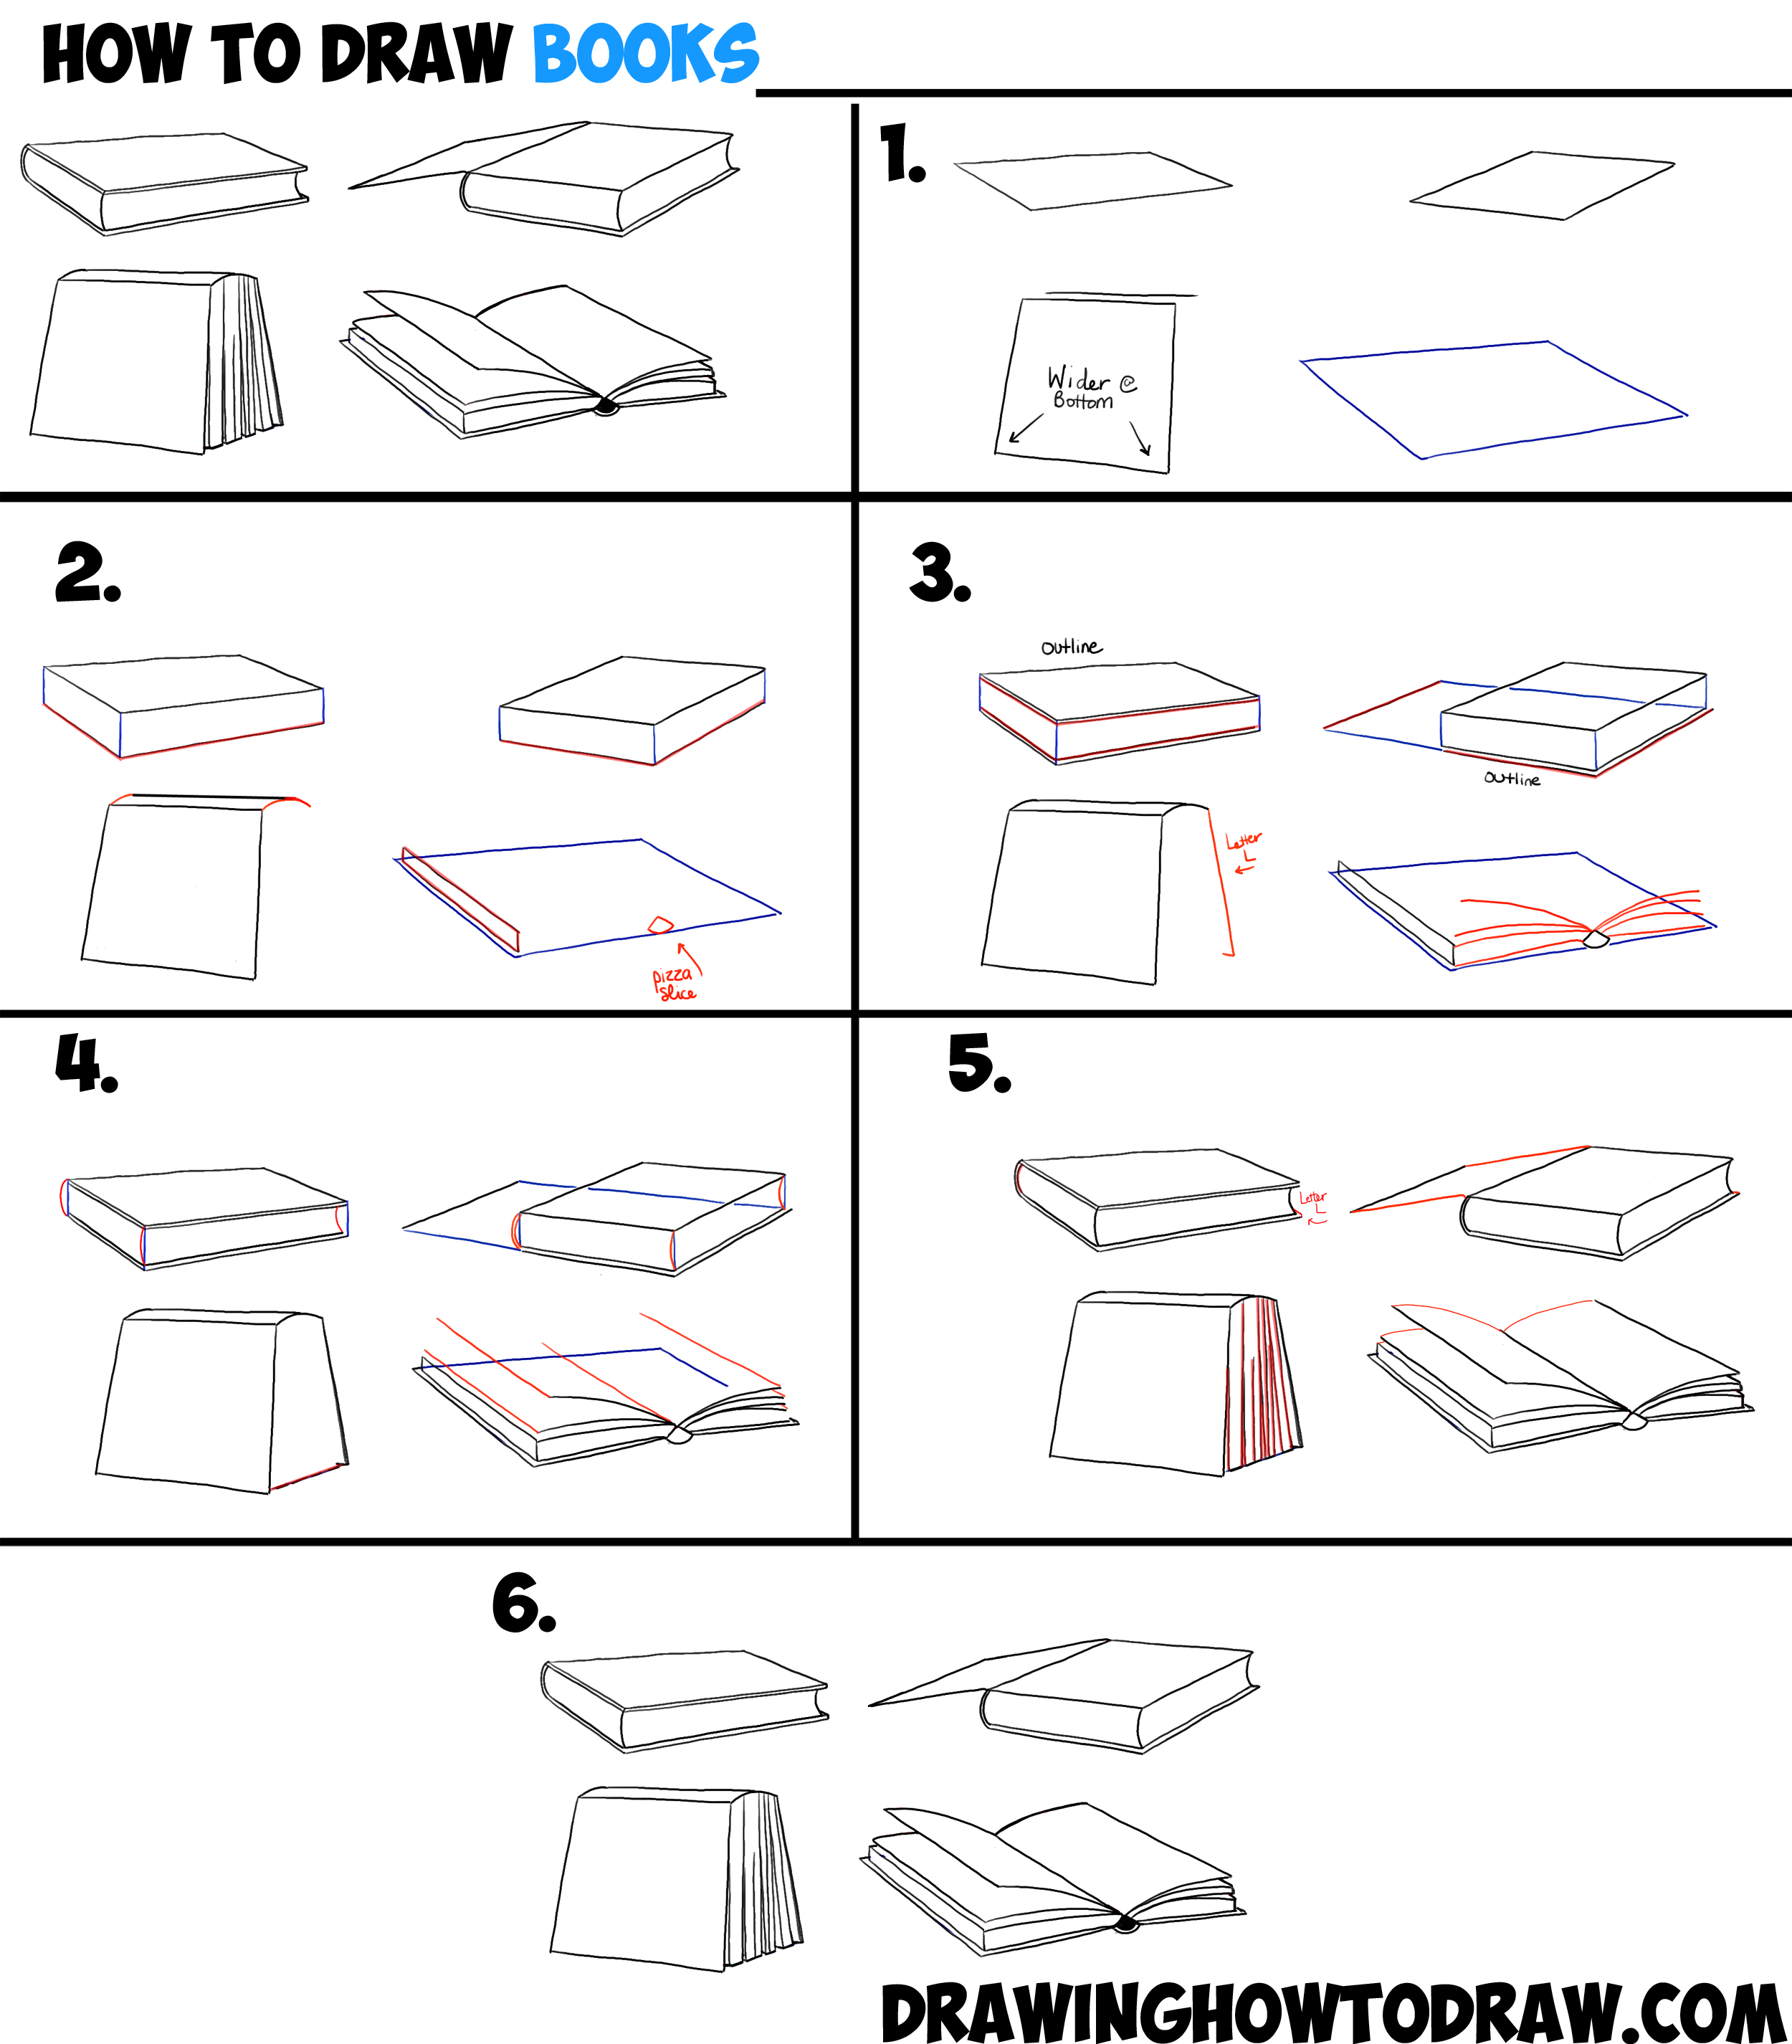 How to Draw Books in 4 Different Angles / Perspectives (Open / Closed